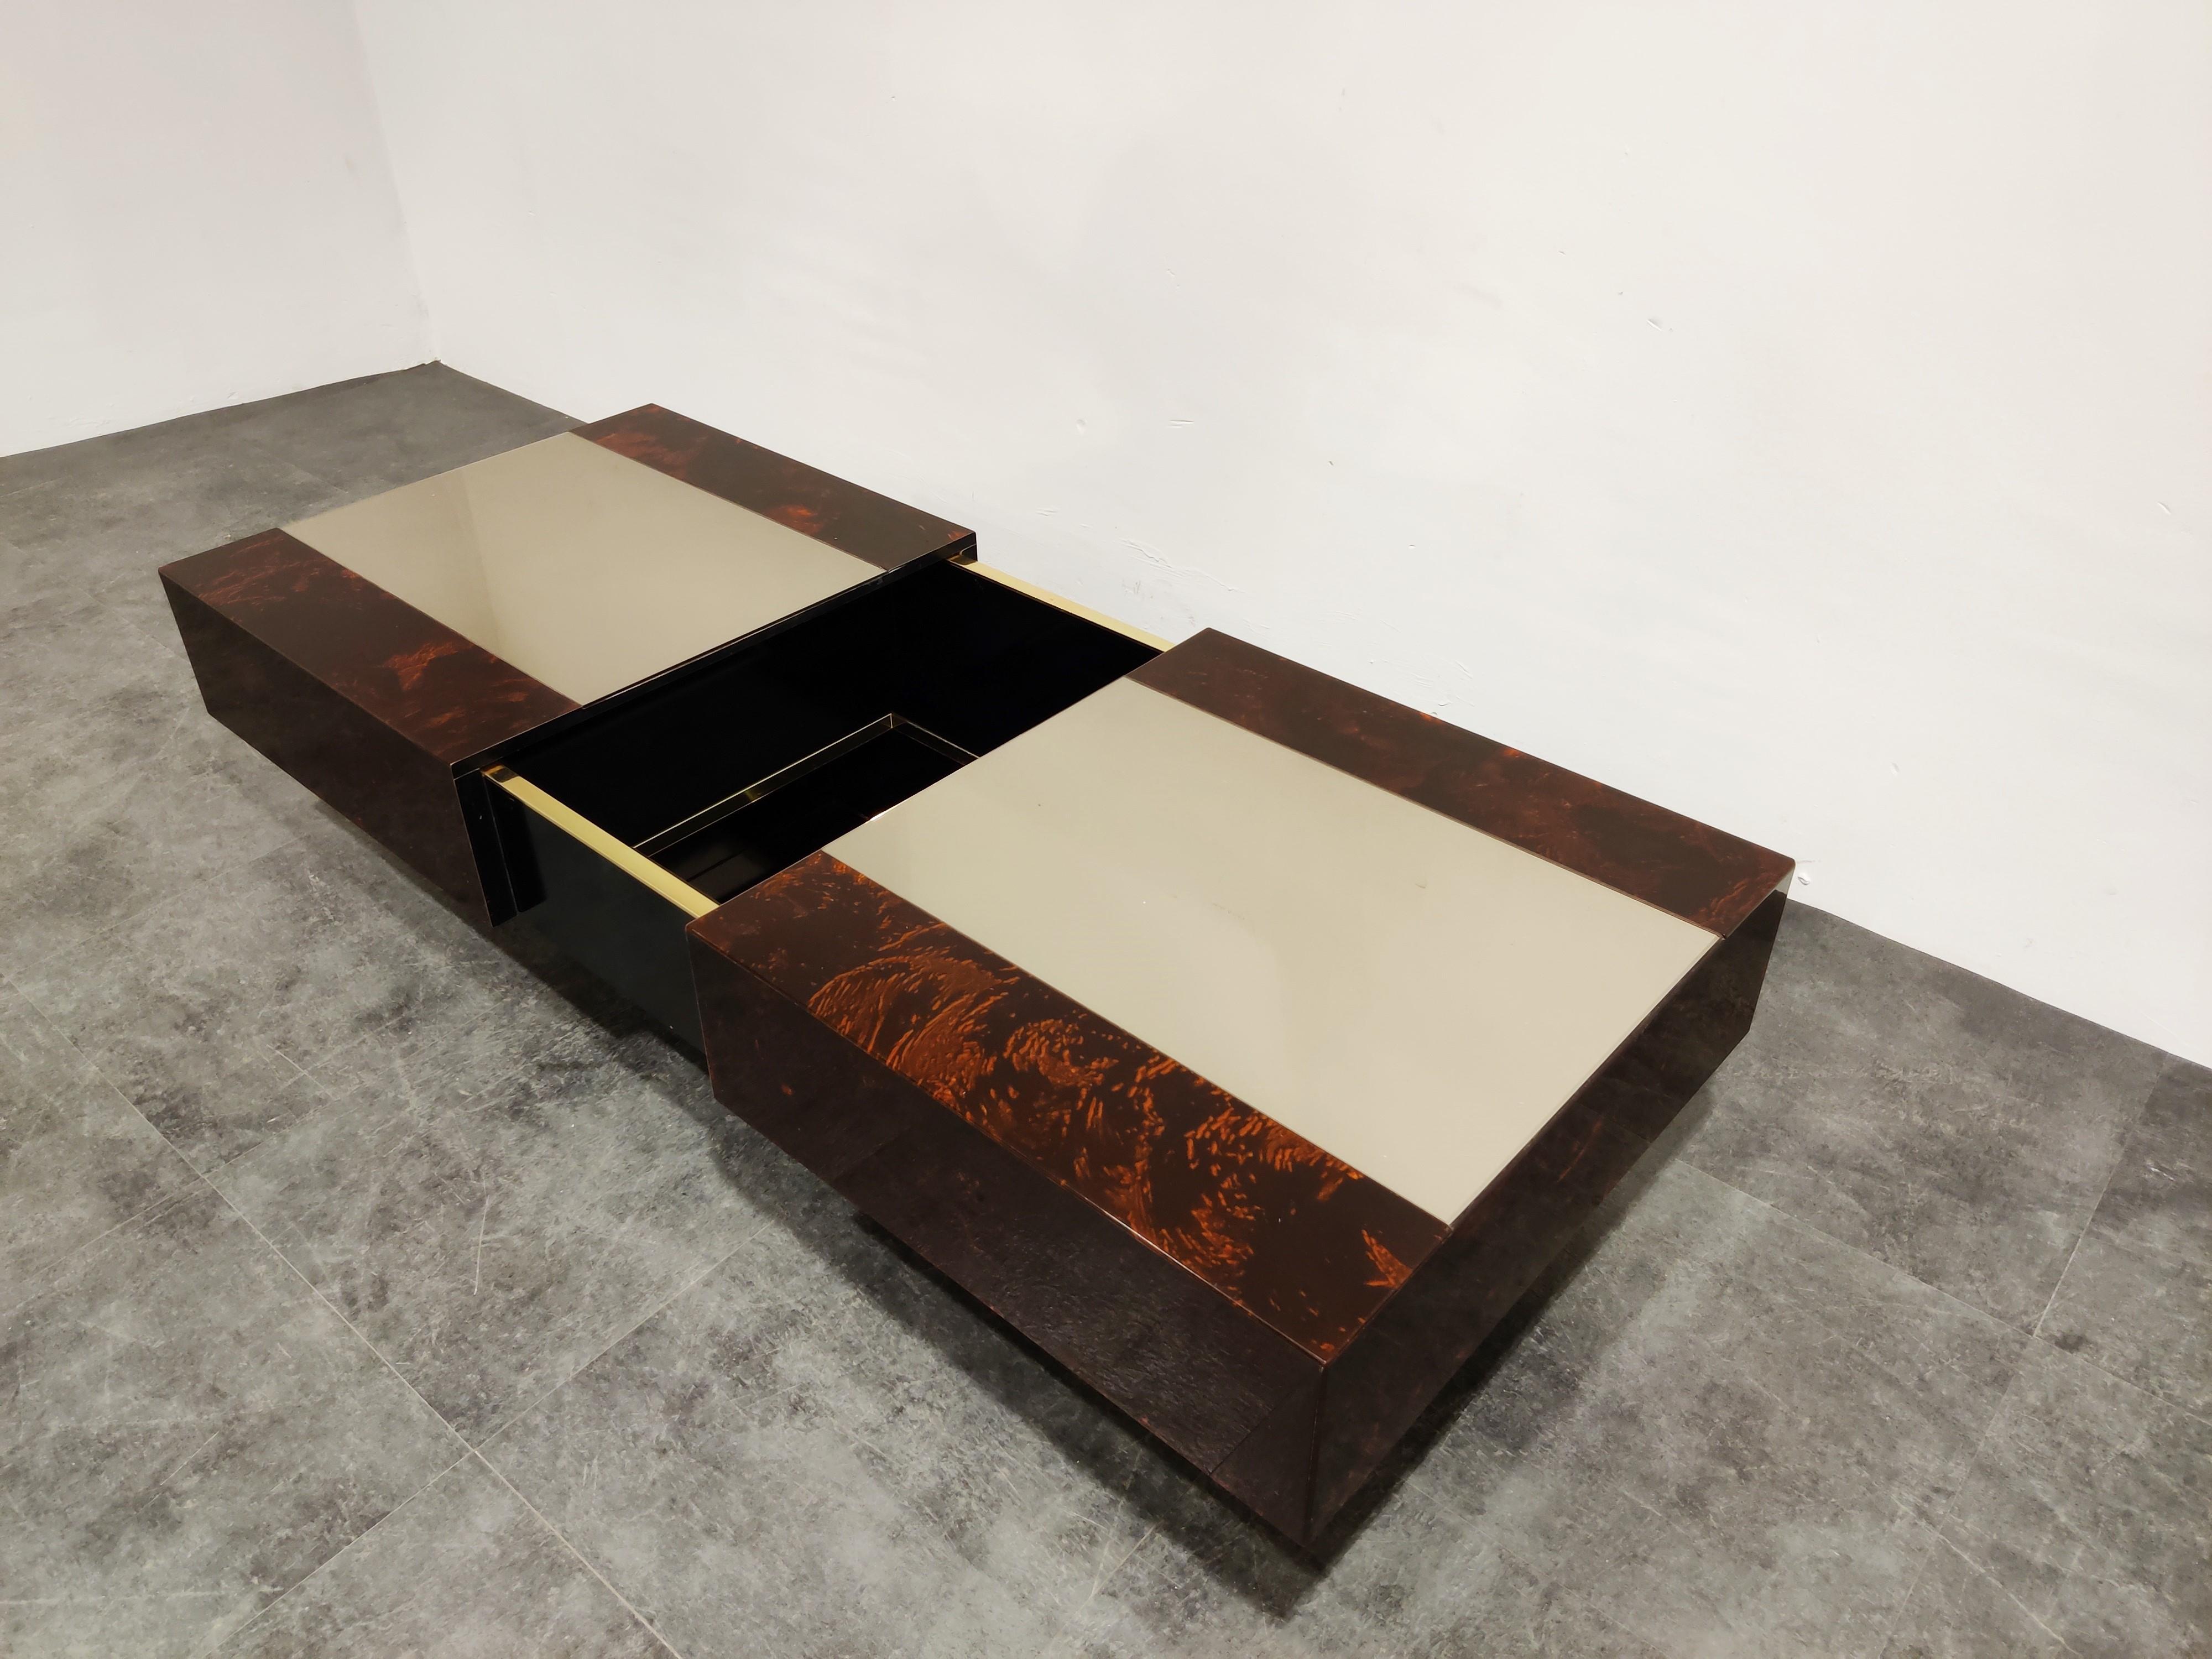 Lacquered wood coffee table by Eric Maville and Jean Claude Mahey.

This luxurious coffee table slides open to reveal a mirrored storage space for bottles and glass. If features a mirrored glass top and a lacquered wooden finish with beautiful